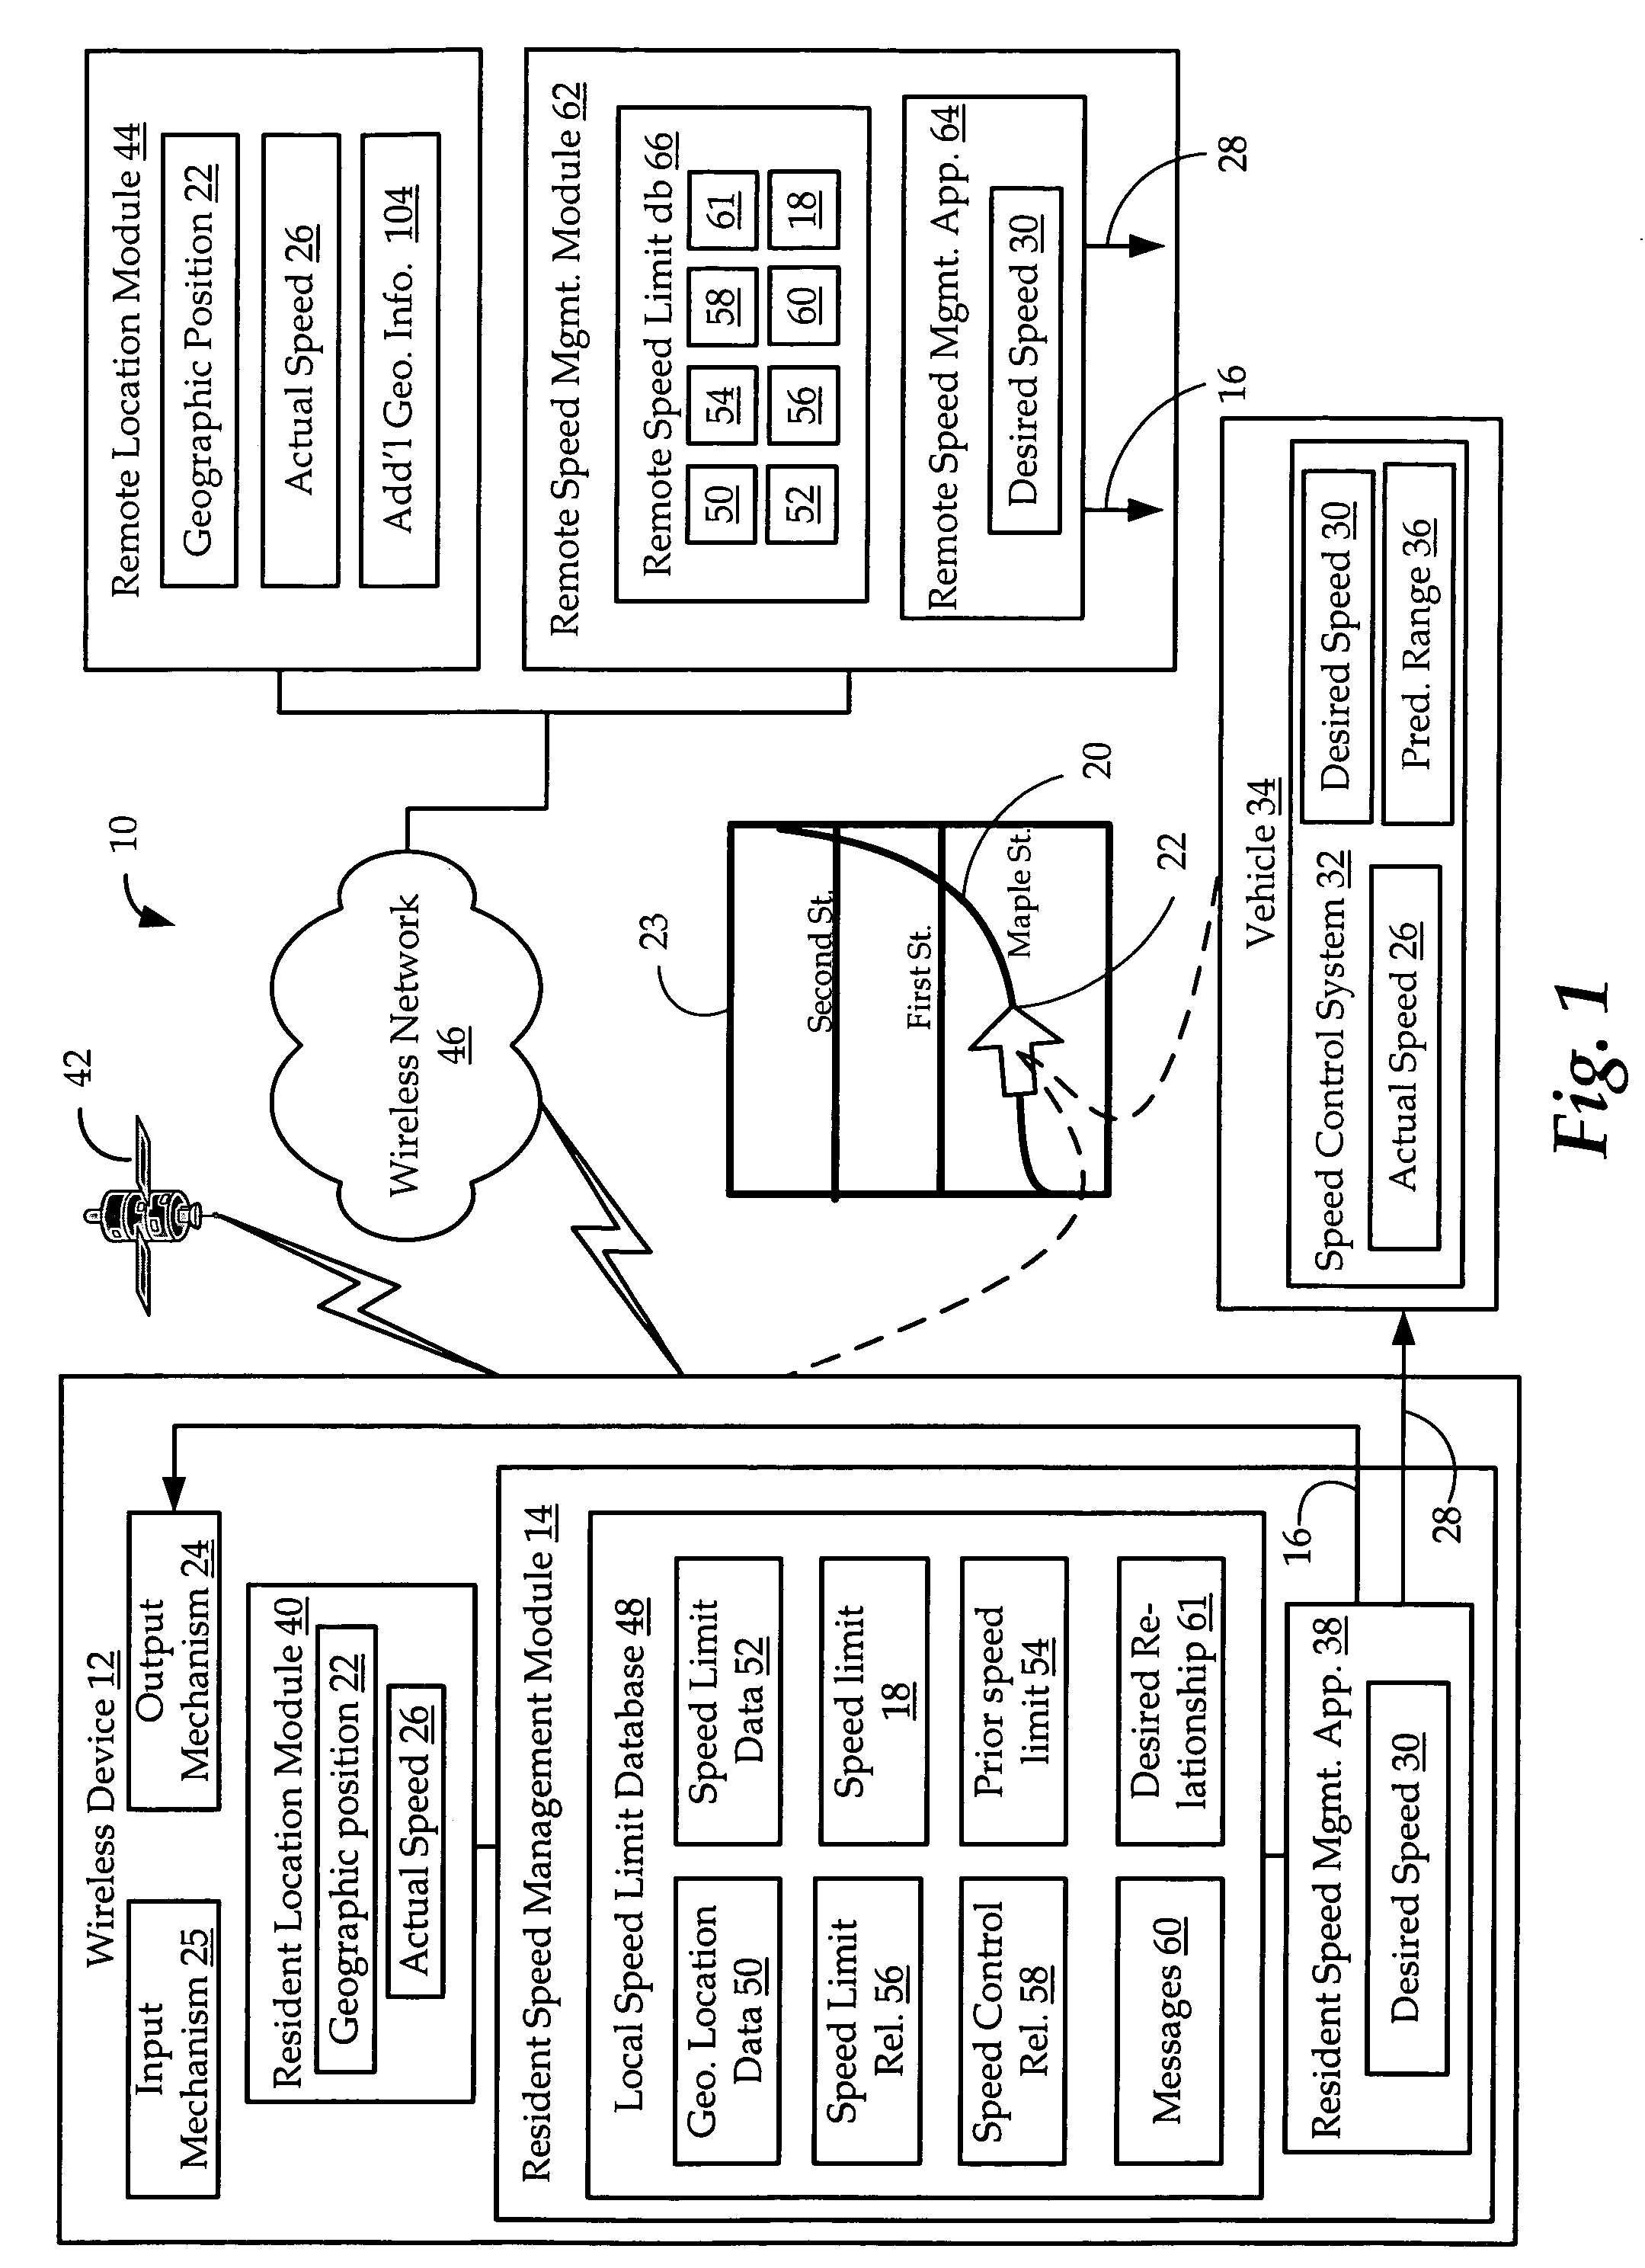 Apparatus and methods for speed management and control